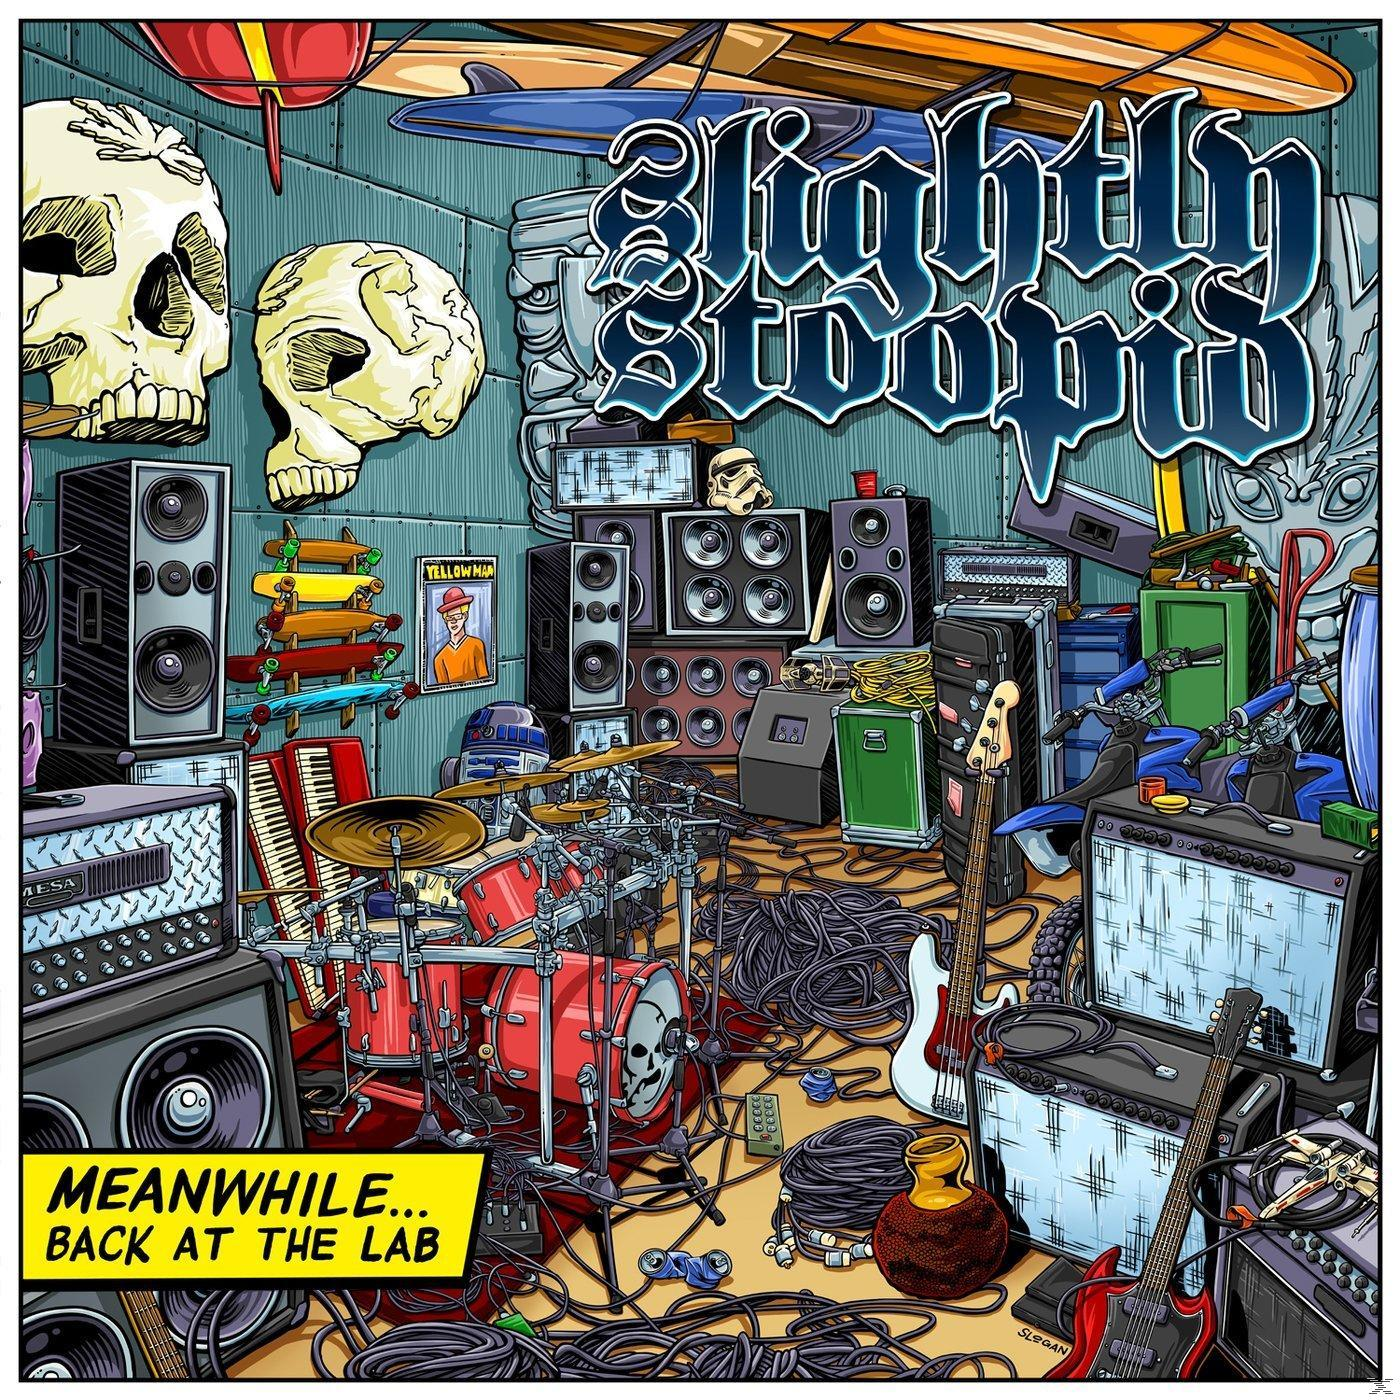 Lab Stoopid Meanwhile...Back - (CD) - Slightly The At